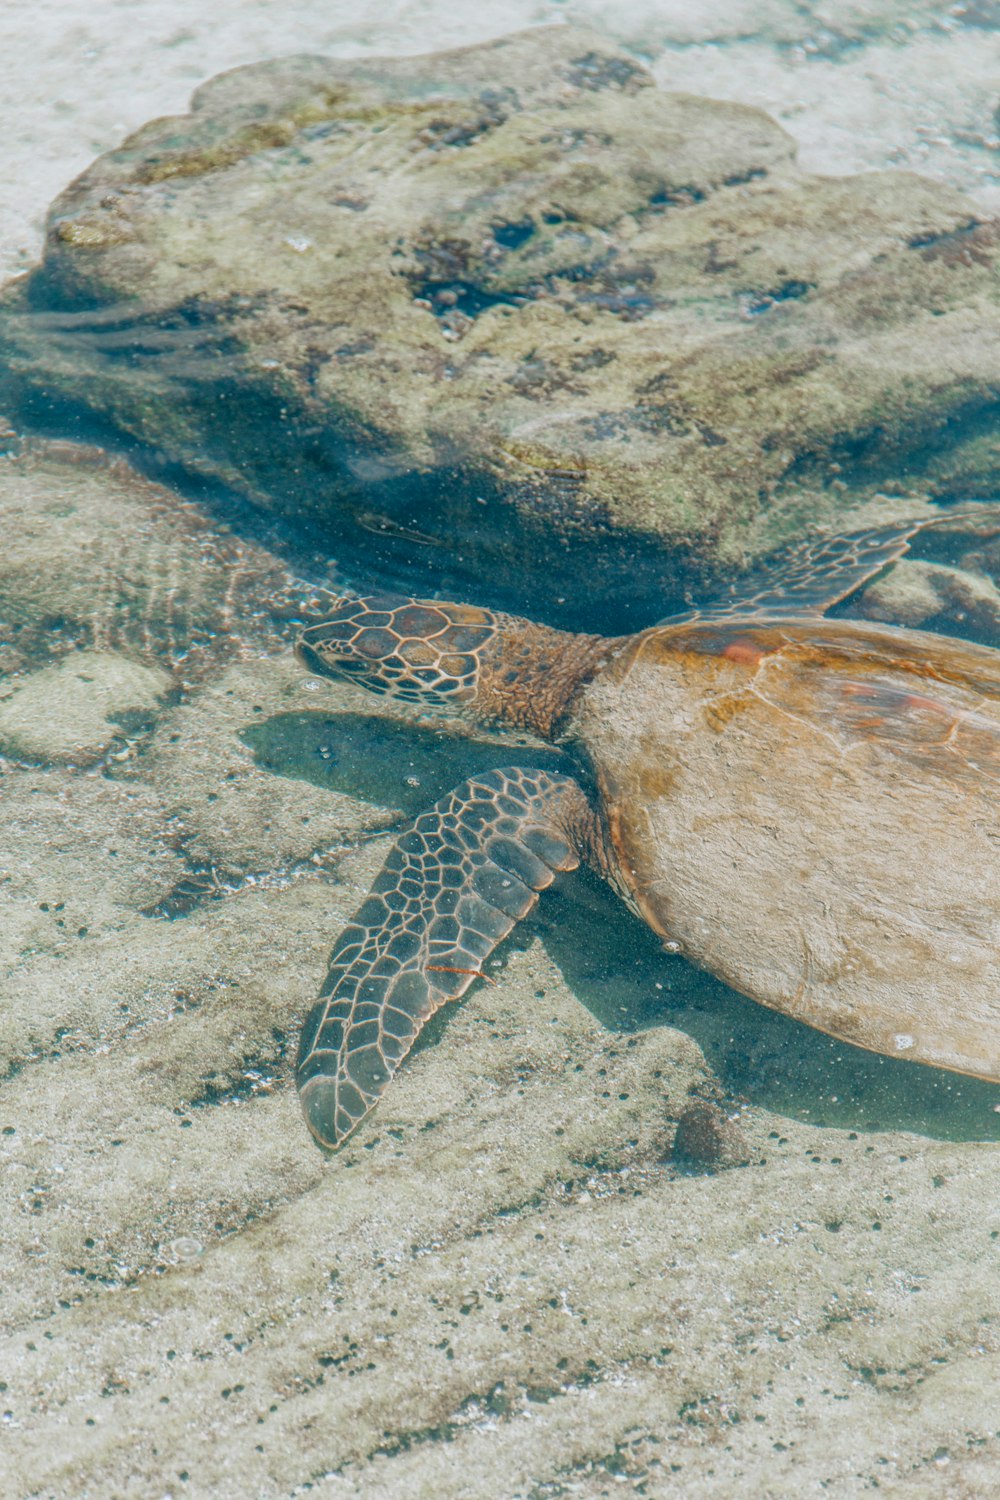 a green turtle swimming in the water